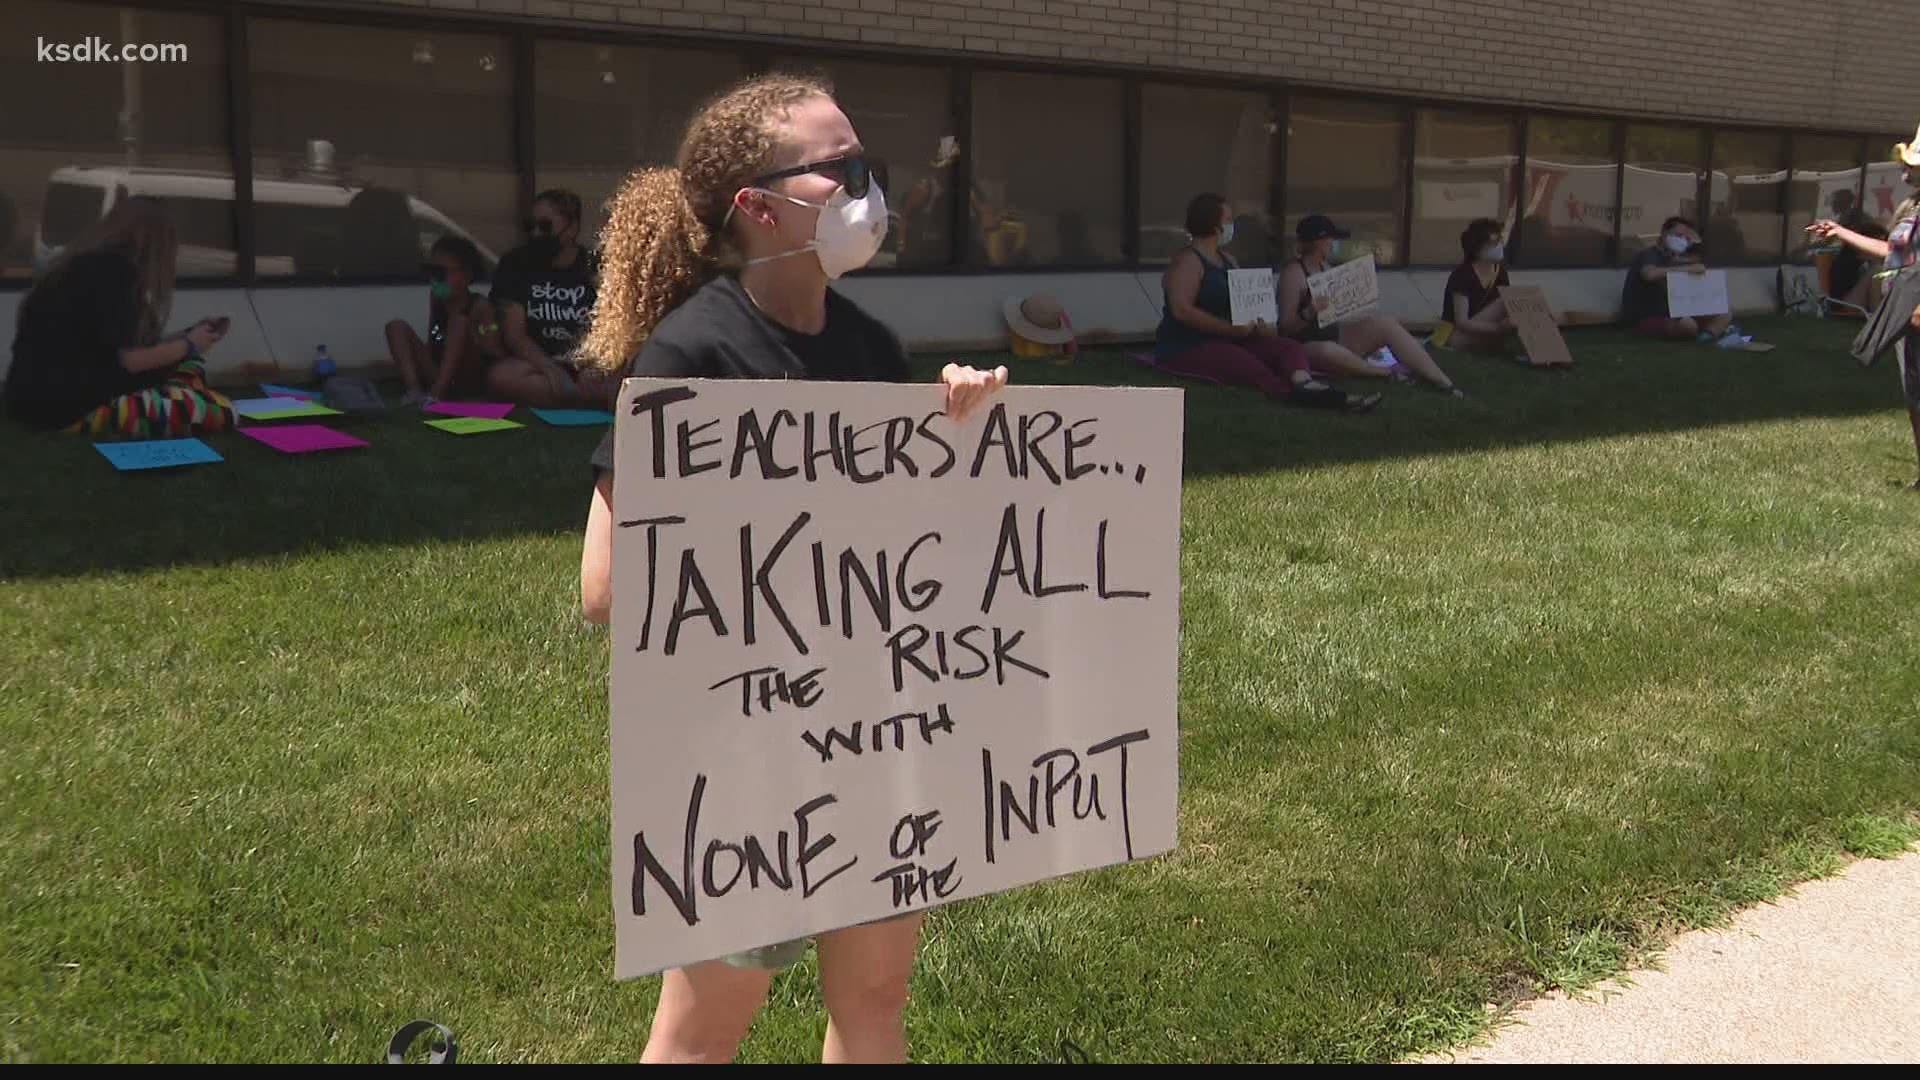 Teachers, supporters of Saint Louis Public Schools District staged a "silent sit-in" in an effort to be heard in reopening conversations